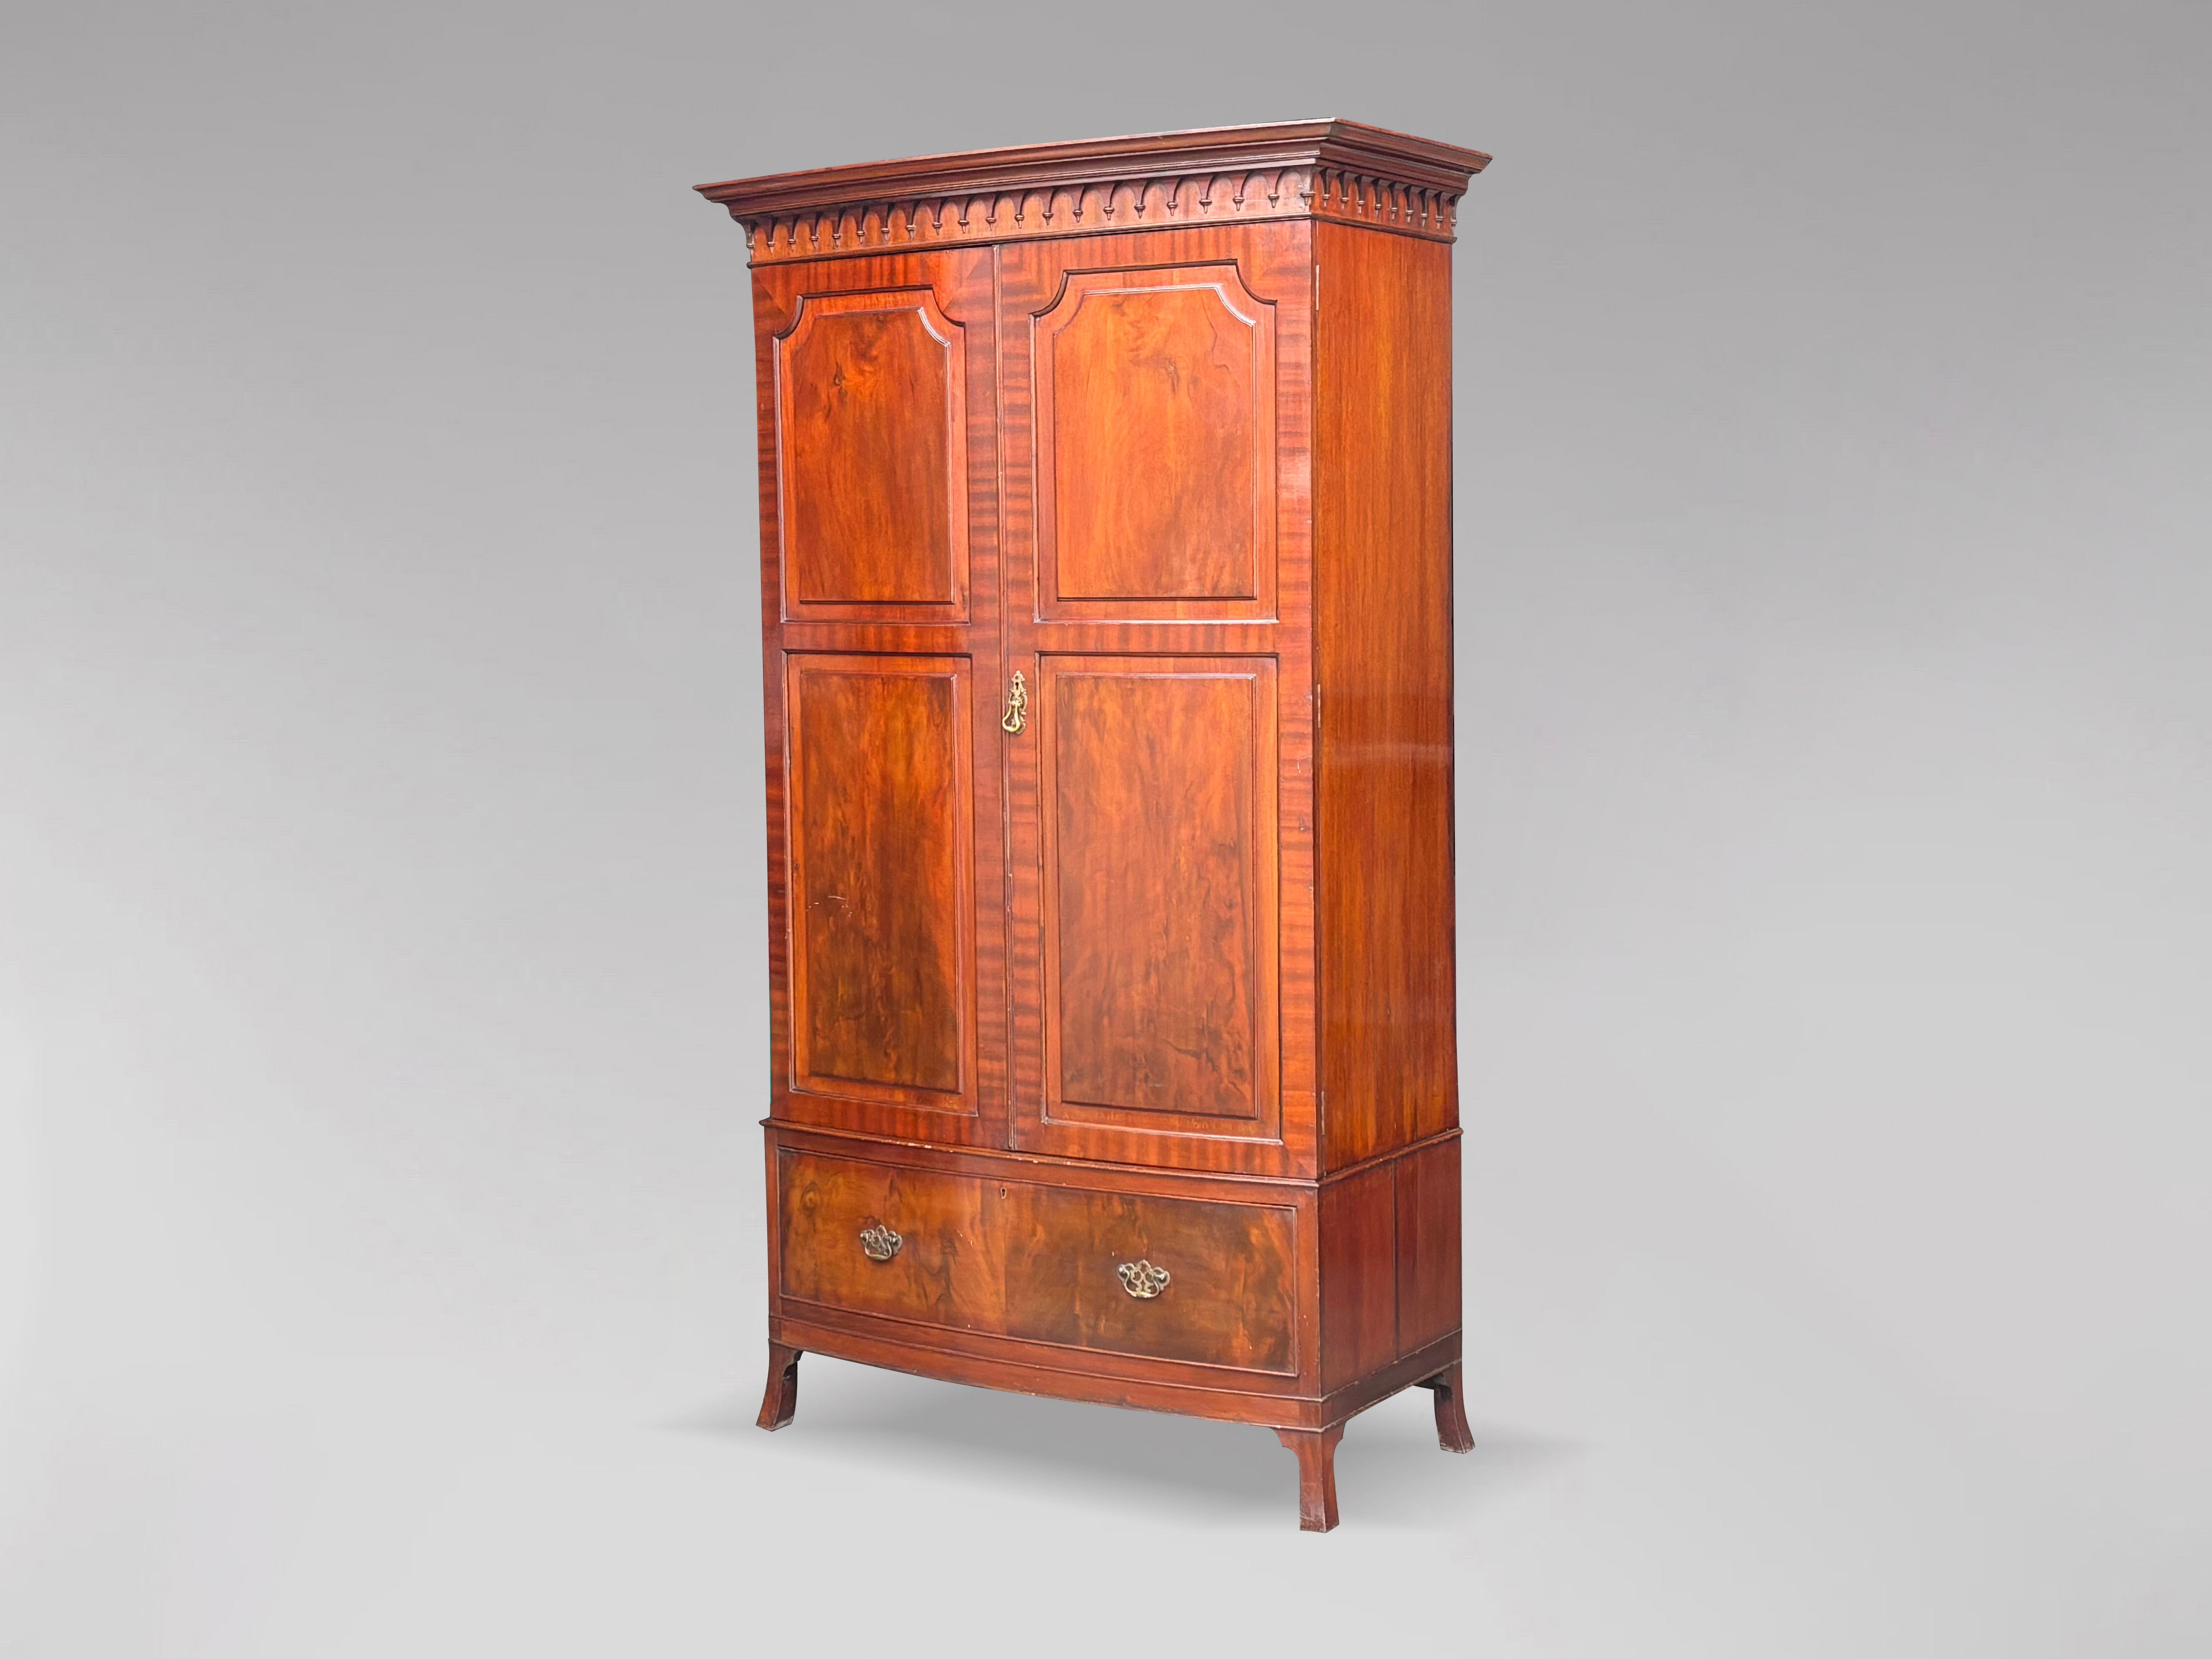 An early 20th century, Edwardian period mahogany bow front 2 door wardrobe. The stepped moulded cornice above a deep frieze with carved arched finials, above two tall bow fronted doors with moulded panels opening to reveal a pair of steel pull out